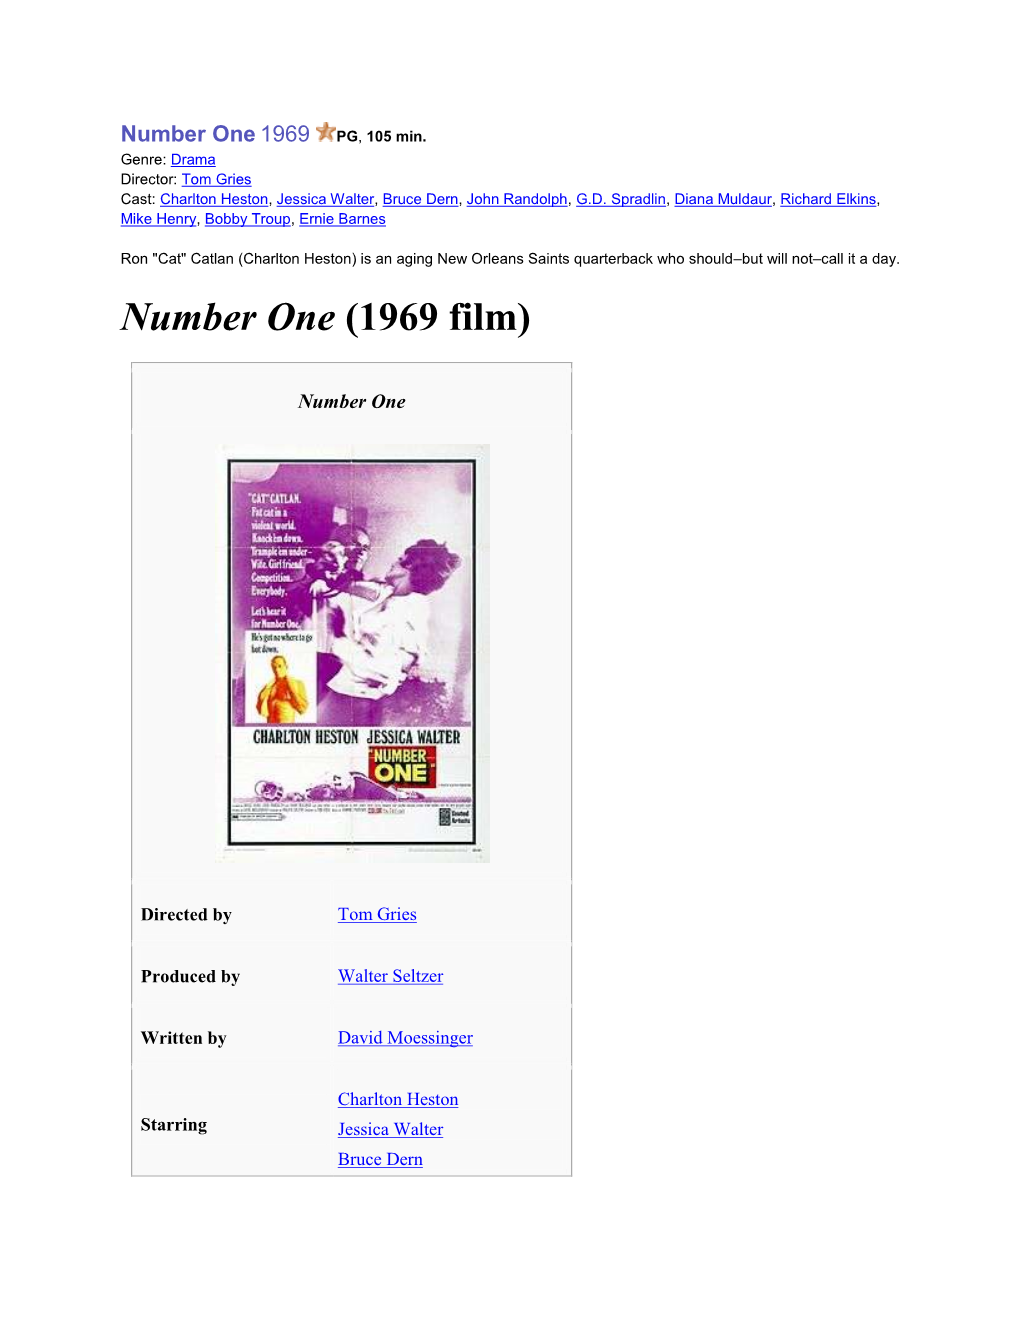 Number One (1969 Film)